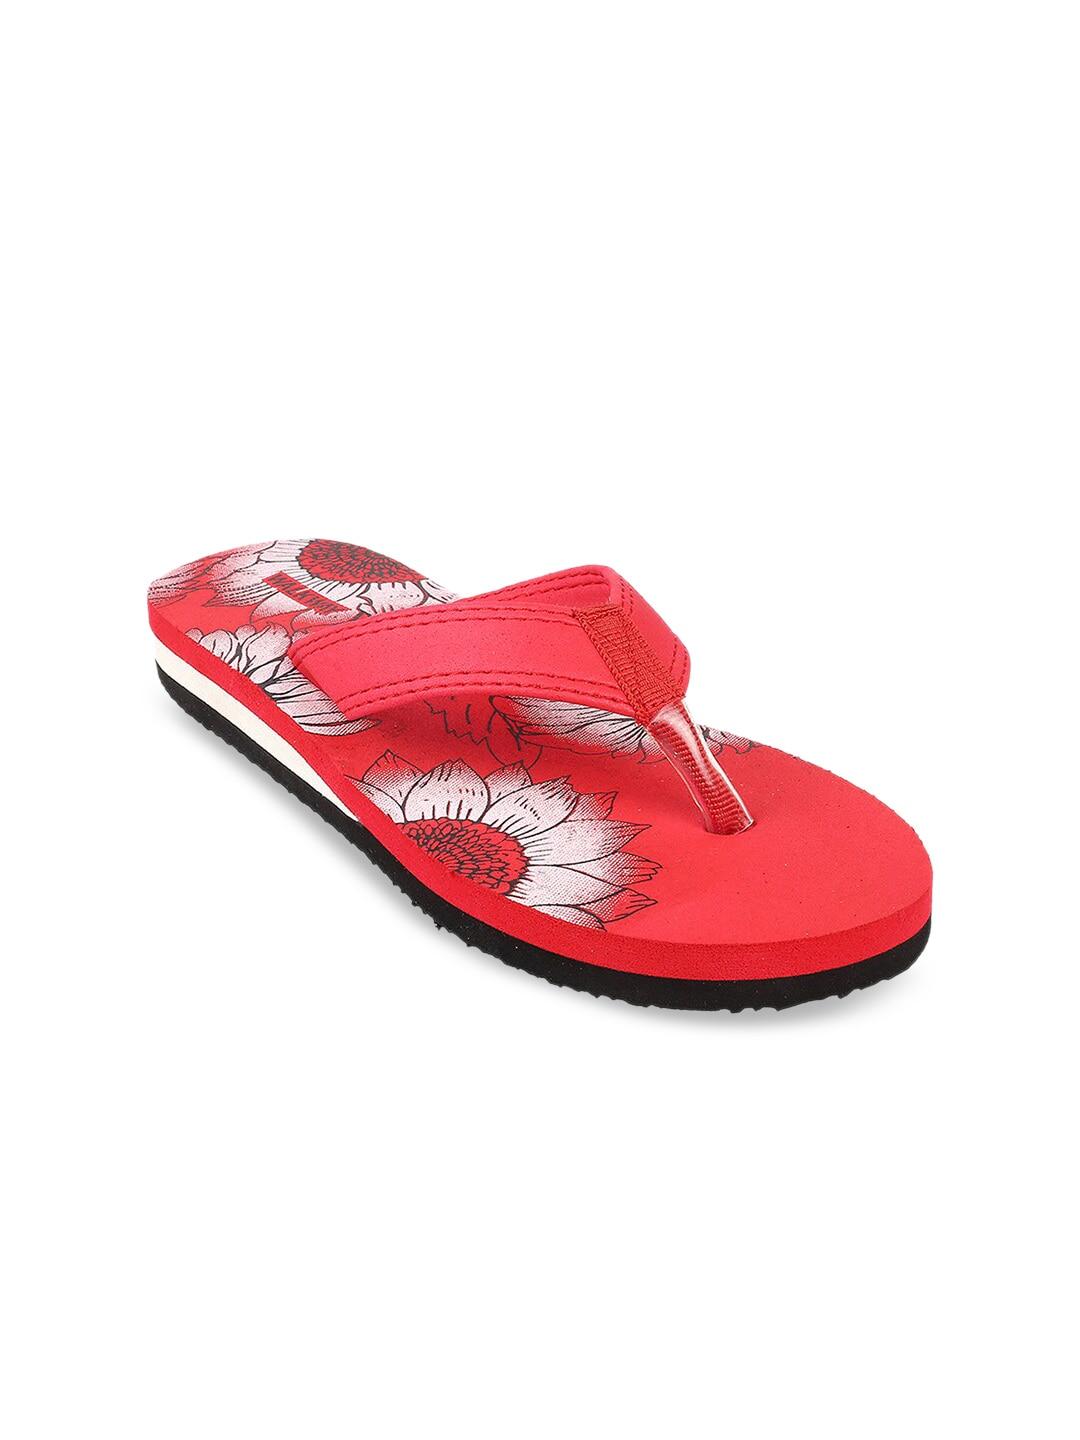 WALKWAY by Metro Women Red Printed T-Strap Flats